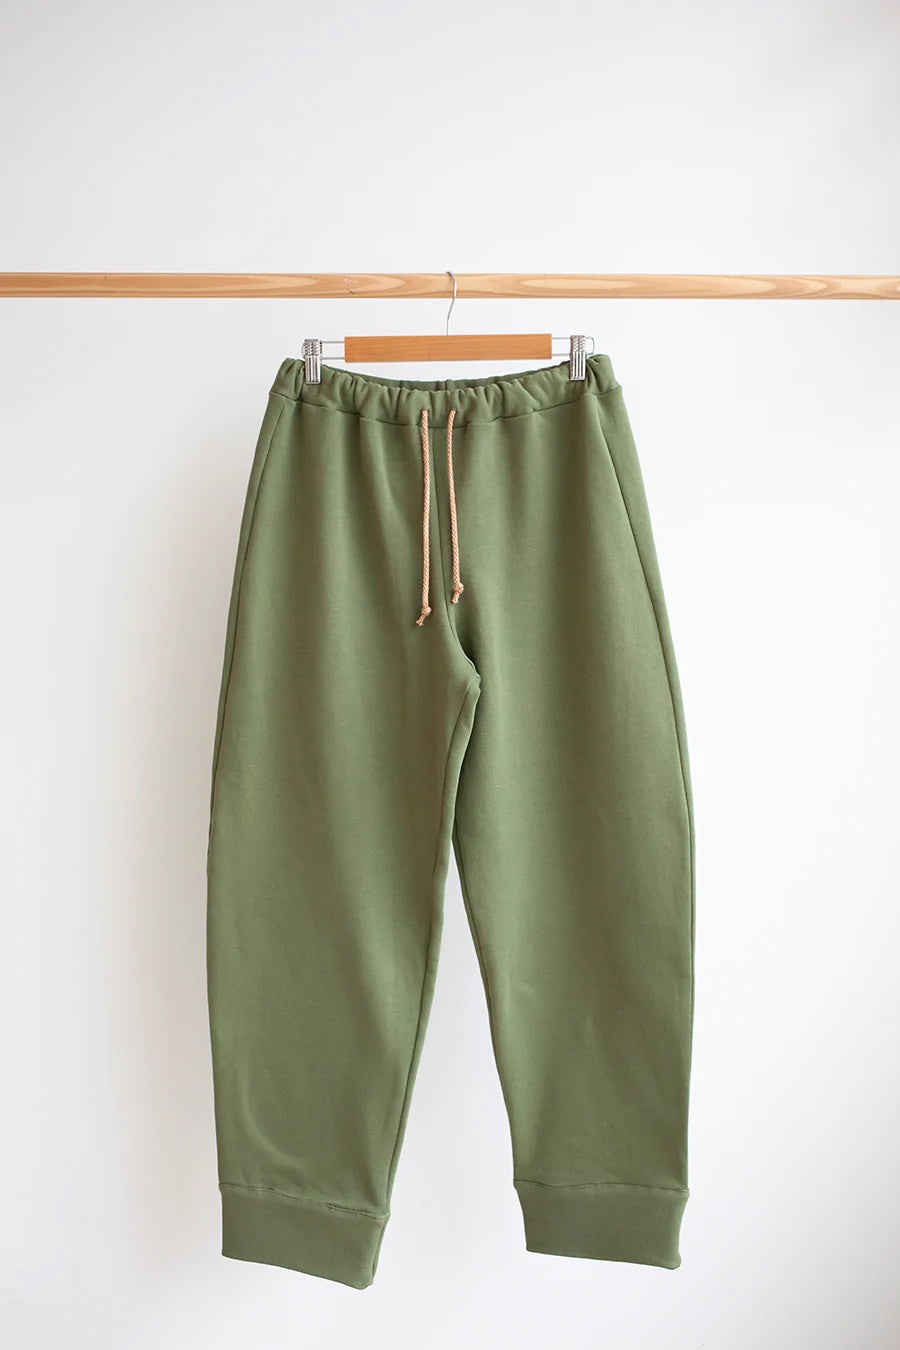 The Modern Sewing Co. Sunday Trackies